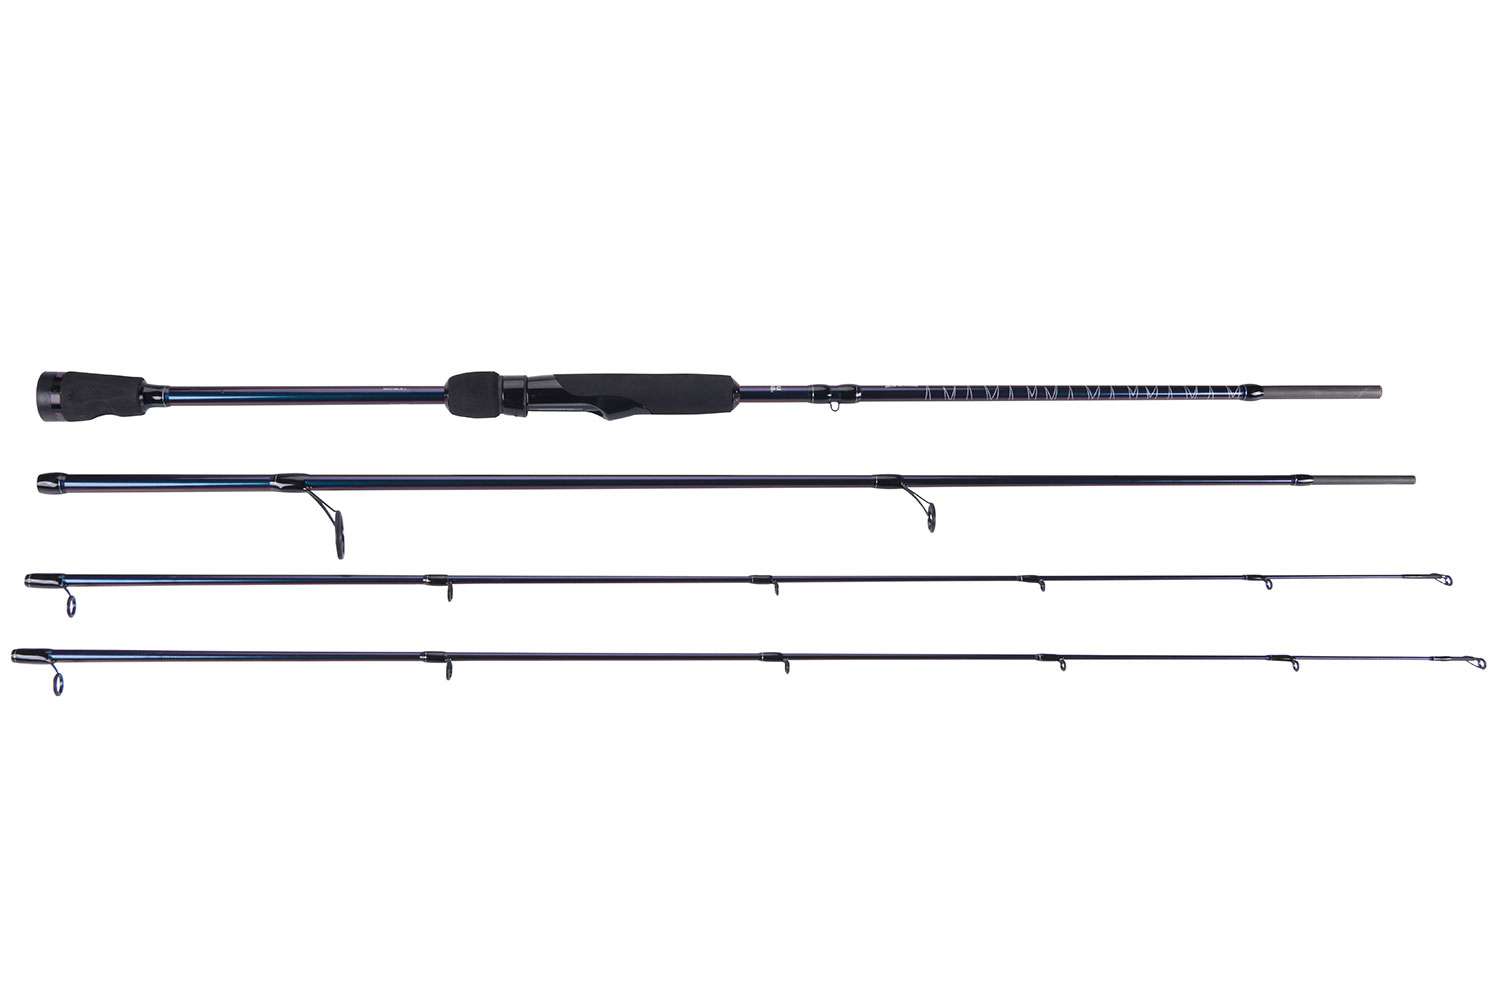 <p><b>Abu Garcia Ike Travel Rod</b></p>
The Abu Garcia Ike Series Travel Rods, available in both spinning and casting models, are true to the level of quality and technology found in all Abu Garcia products with an easy-to-assemble four-piece design. The rods are forged with 36-ton graphite, for a lightweight, balanced design, featuring stainless steel guides with Zirconium inserts, and a Fuji reel seat â delivering increased sensitivity and comfort at no loss of durability. Purchase of the Ike Travel Rod includes a hard case as well as a limited three-year warranty.<br>
<p><b>MSRP $149.95</b></p>
<a href=